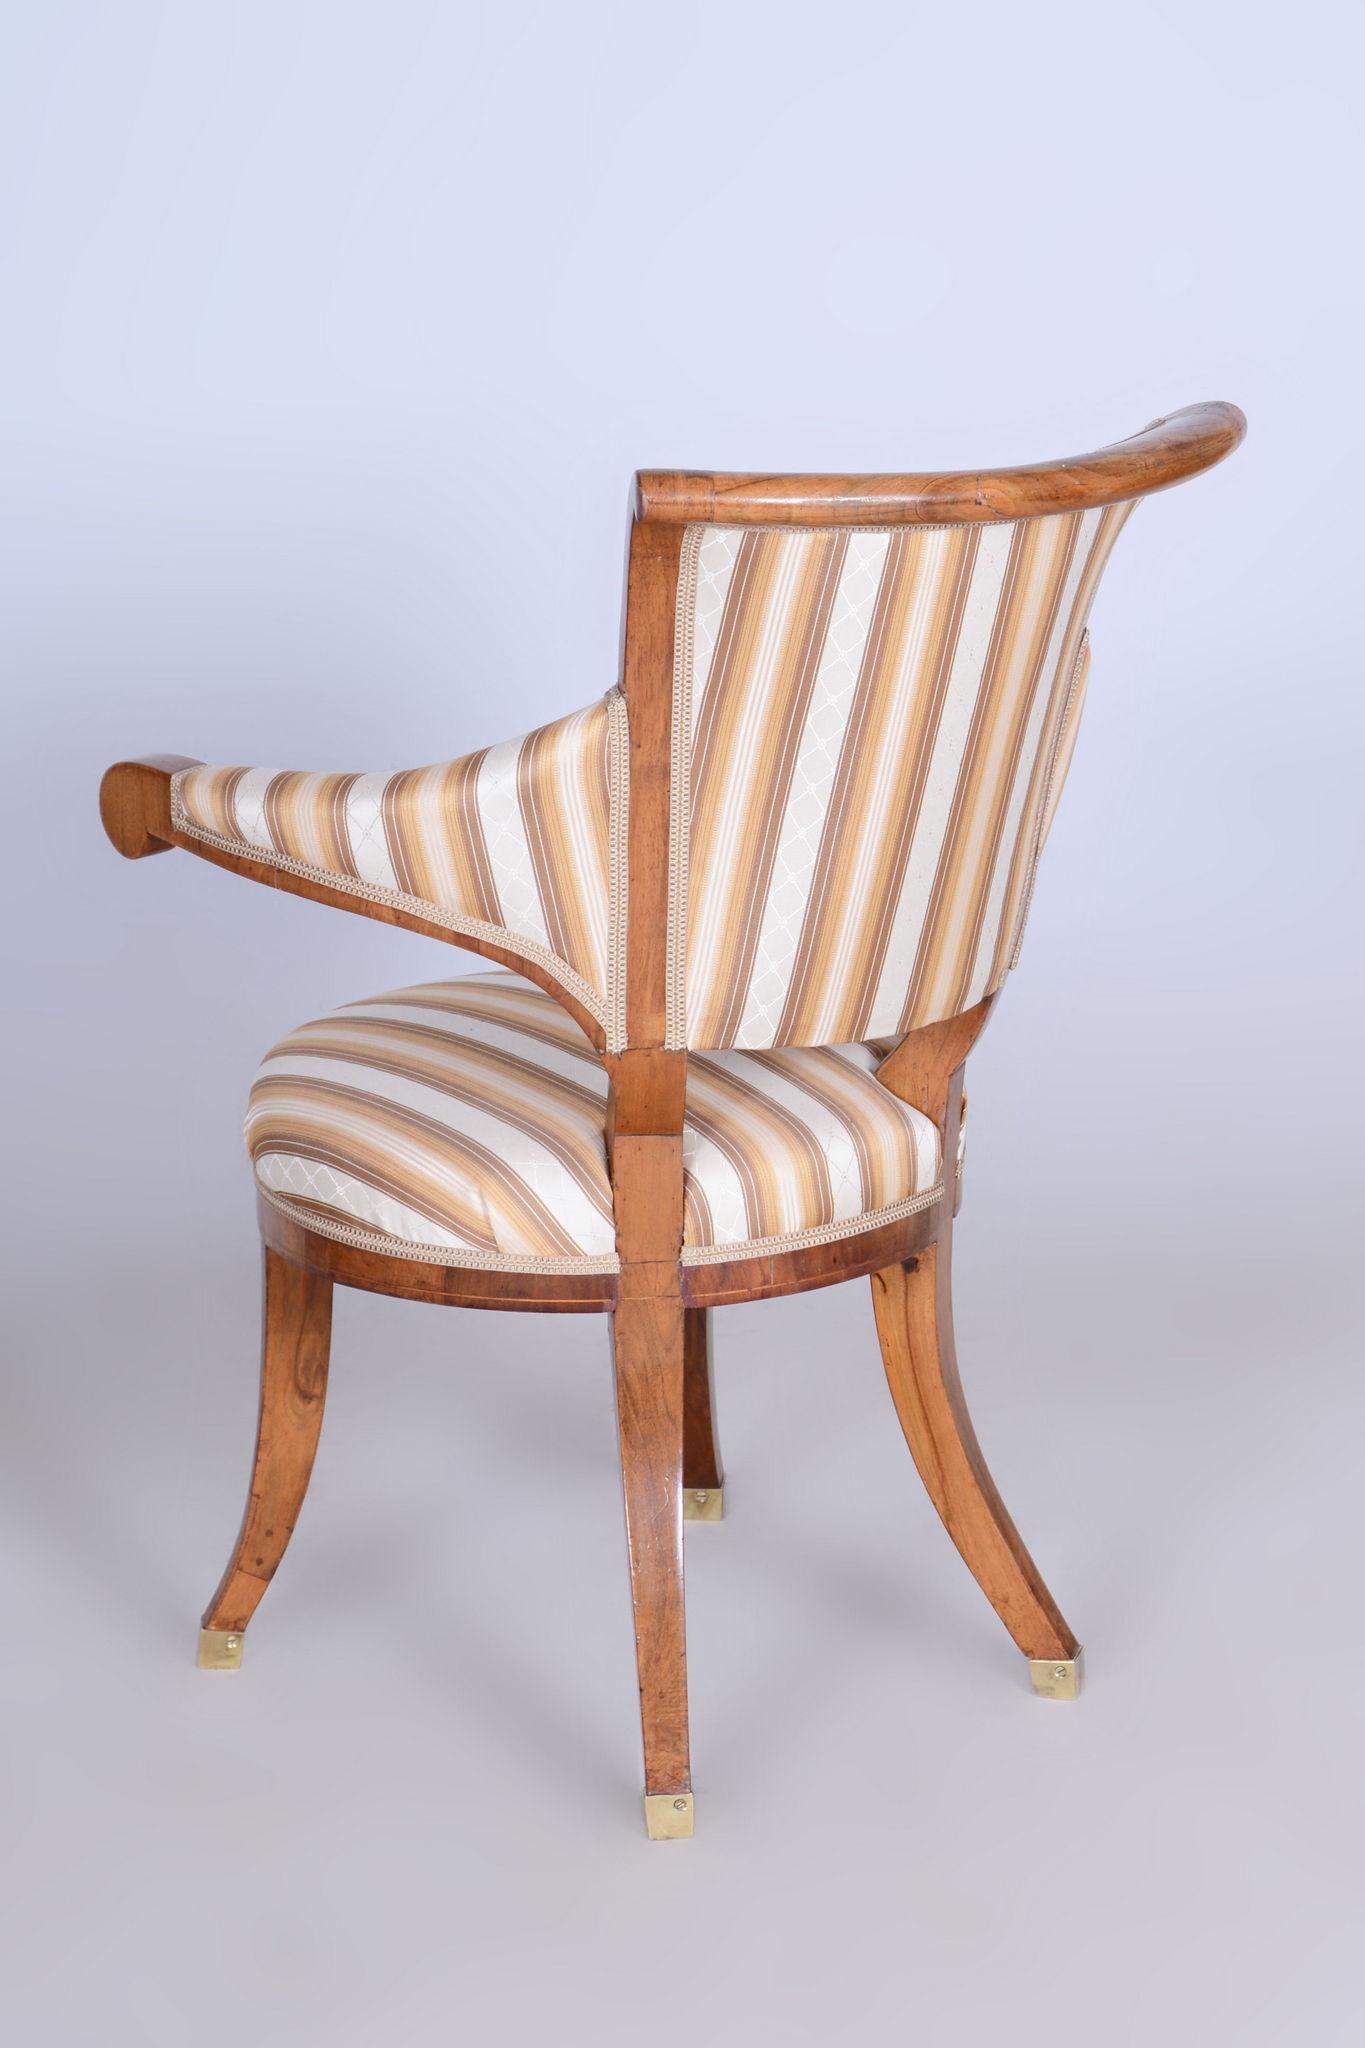 Restored Biedermeier Walnut Armchair attributed to Josef Danhauser.

Source: Vienna, Austria
Period: 1820-1829
Material: Walnut
Revived polish.
New professional upholstery.
Seat height: 40 cm / 15.75″

Our professional refurbishing team in Czechia